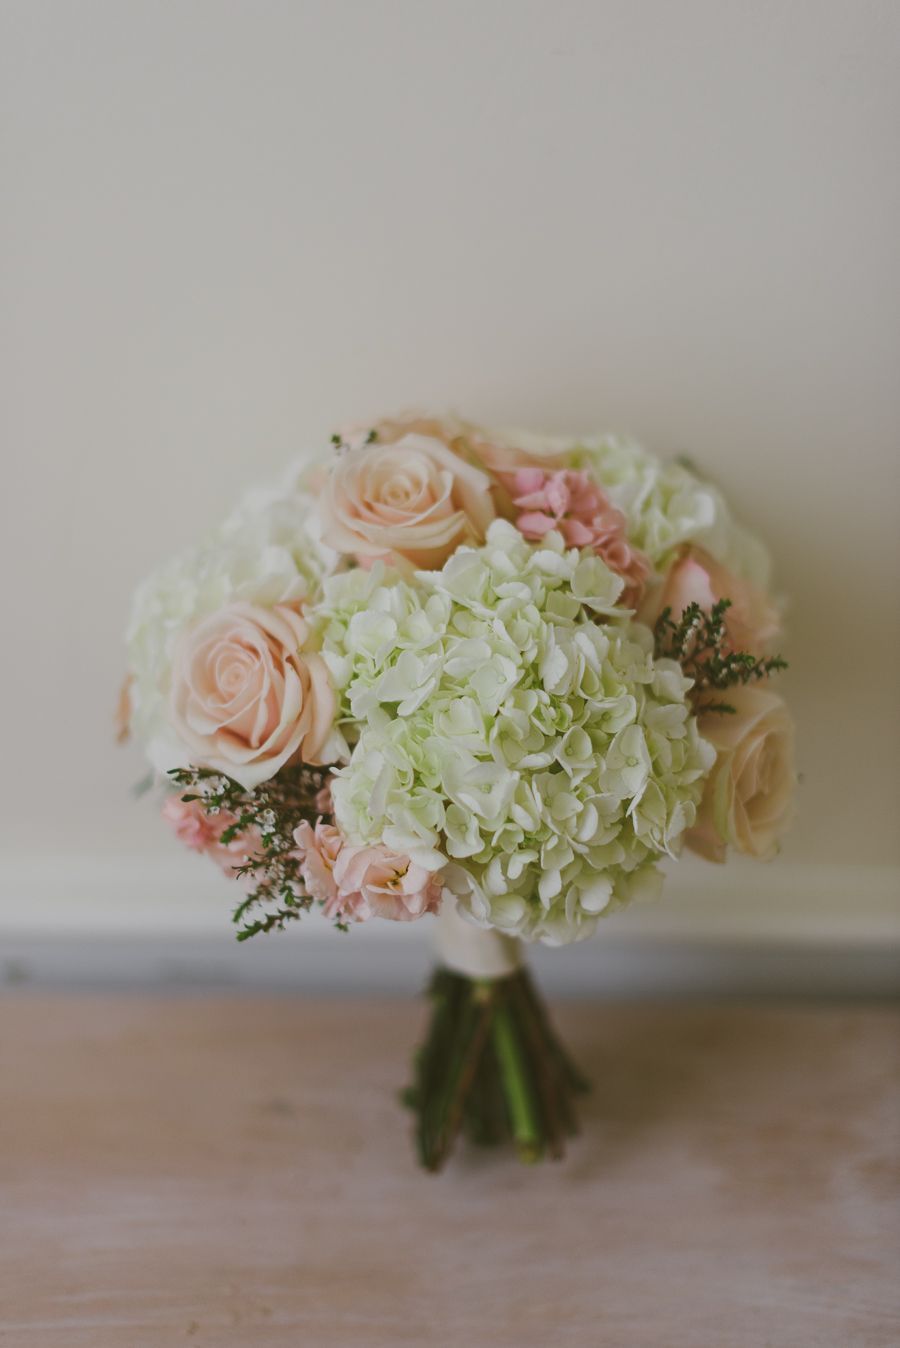 hydrangea bouquet – reminds me of my bouquet except my roses were ivory. Hydrangeas take up a lot of space